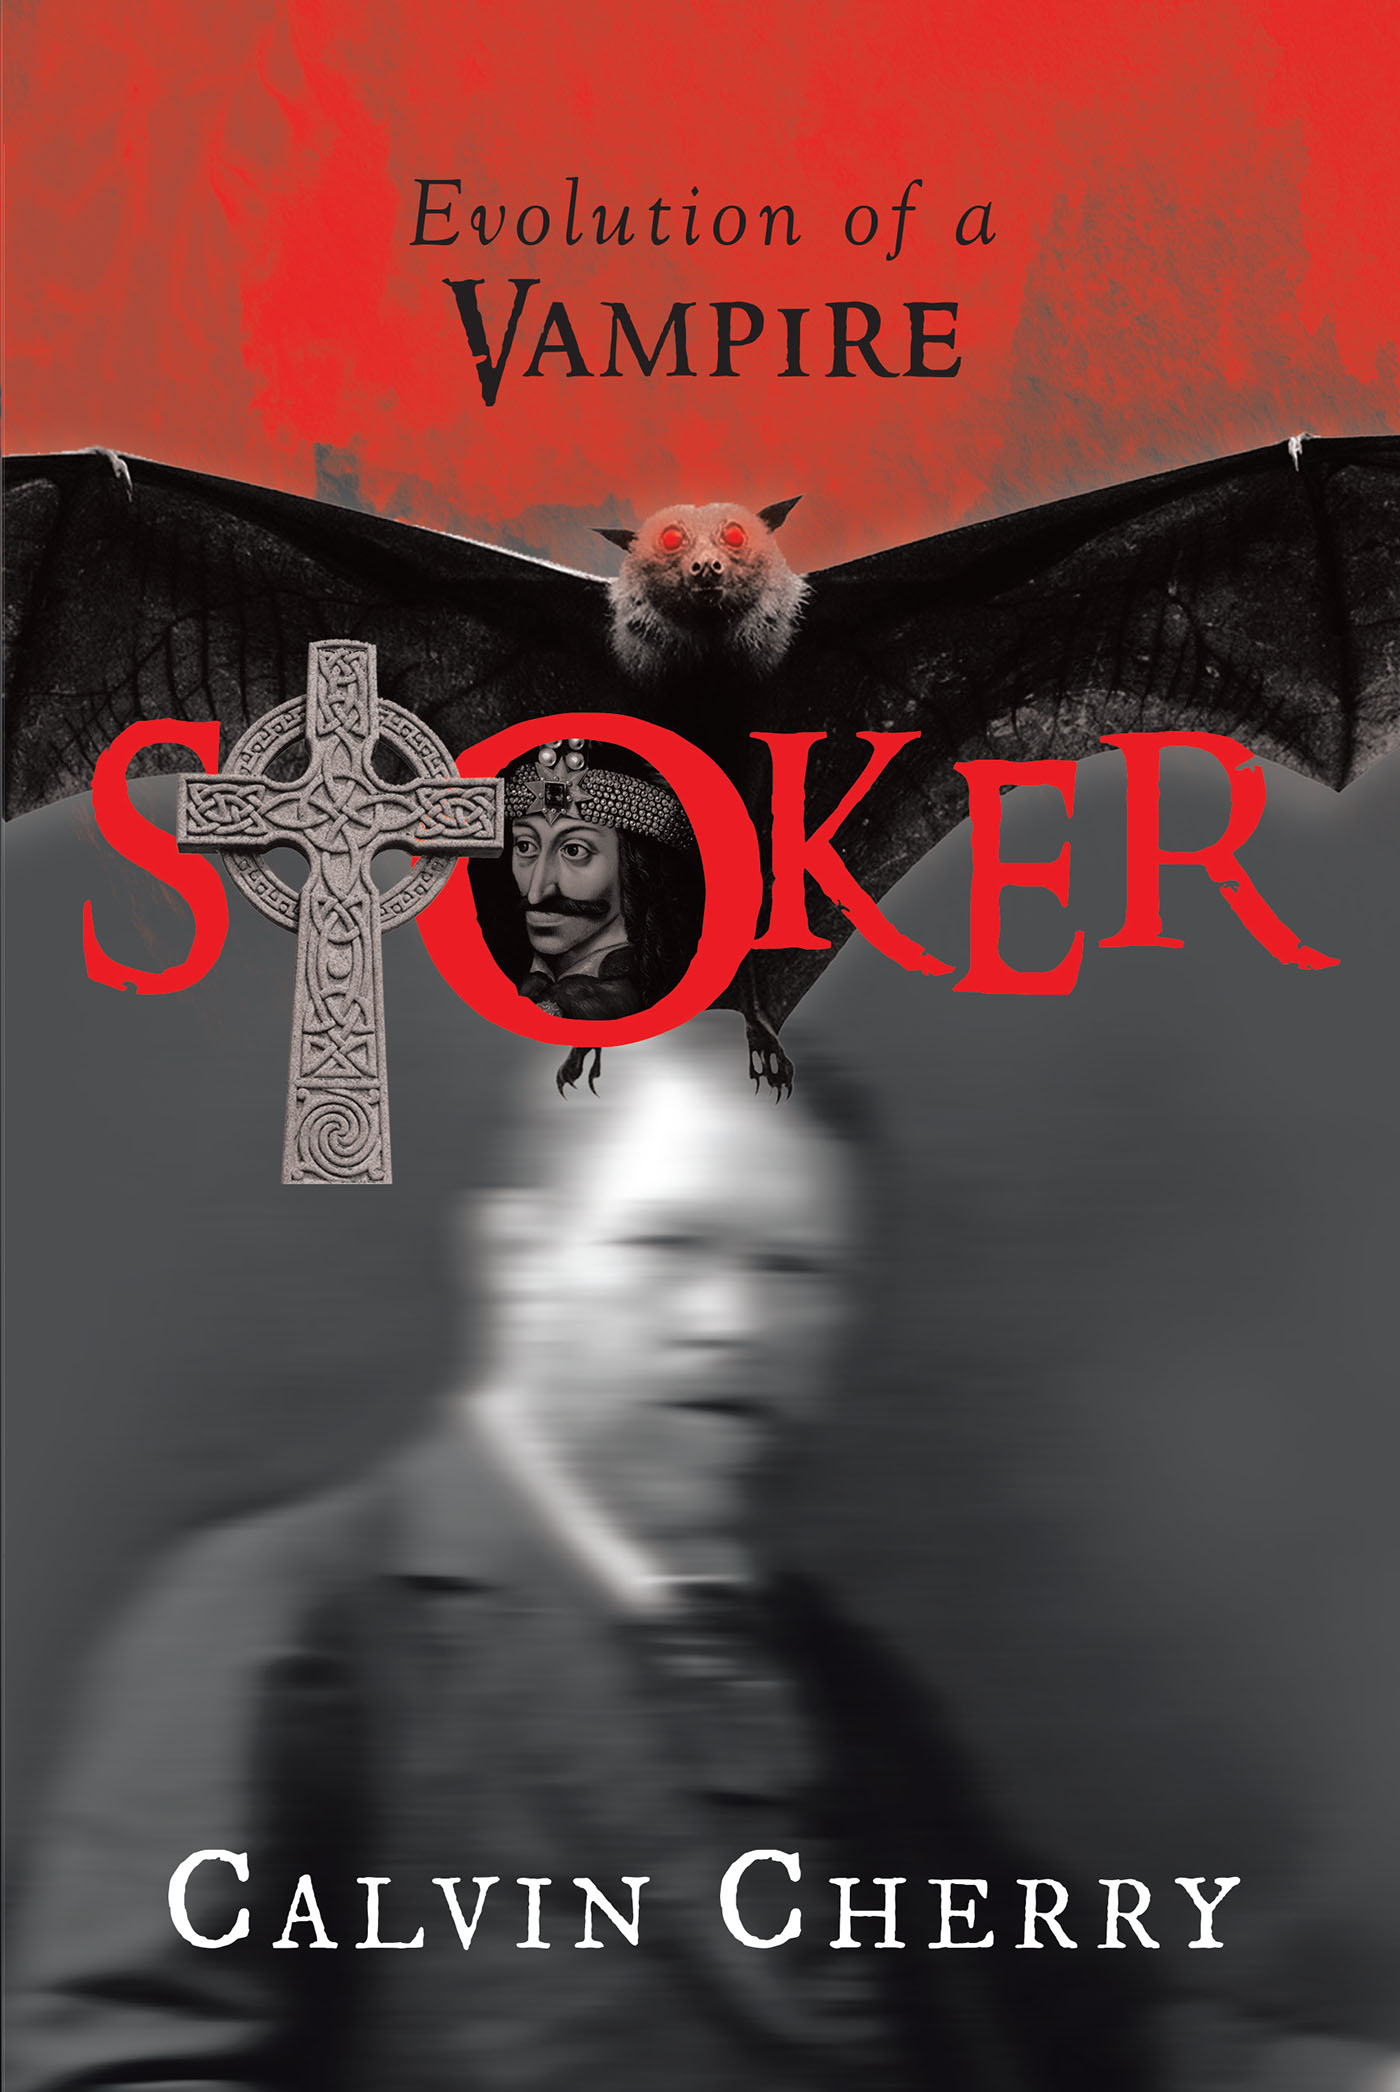 Calvin Cherrys New Book “stoker Evolution Of A Vampire” Is A 